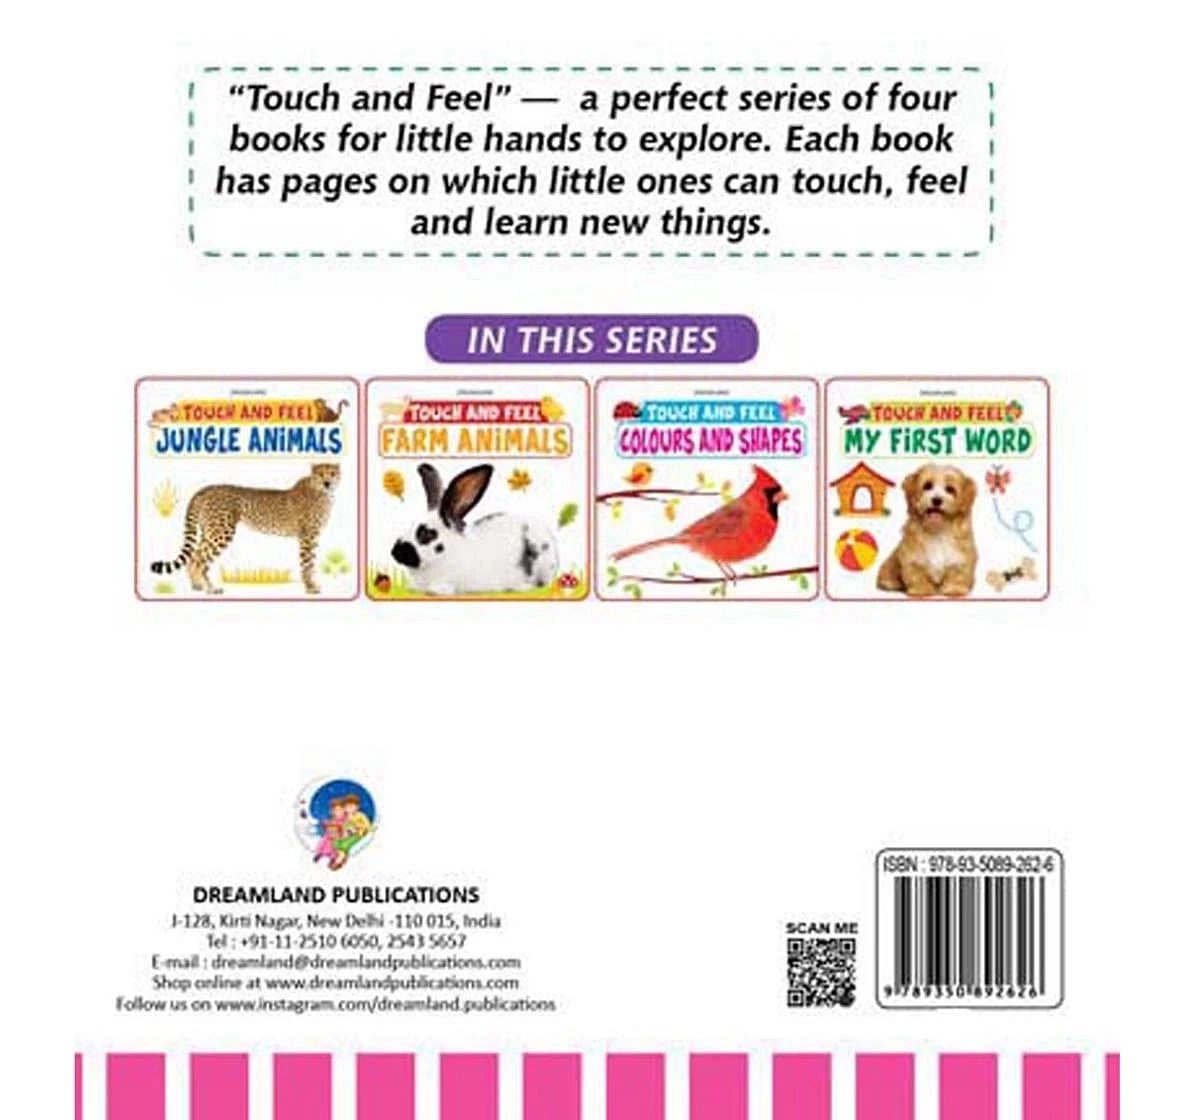 Dreamland Touch and Feel Colours Shapes Books for Kids 1Y+, Multicolour